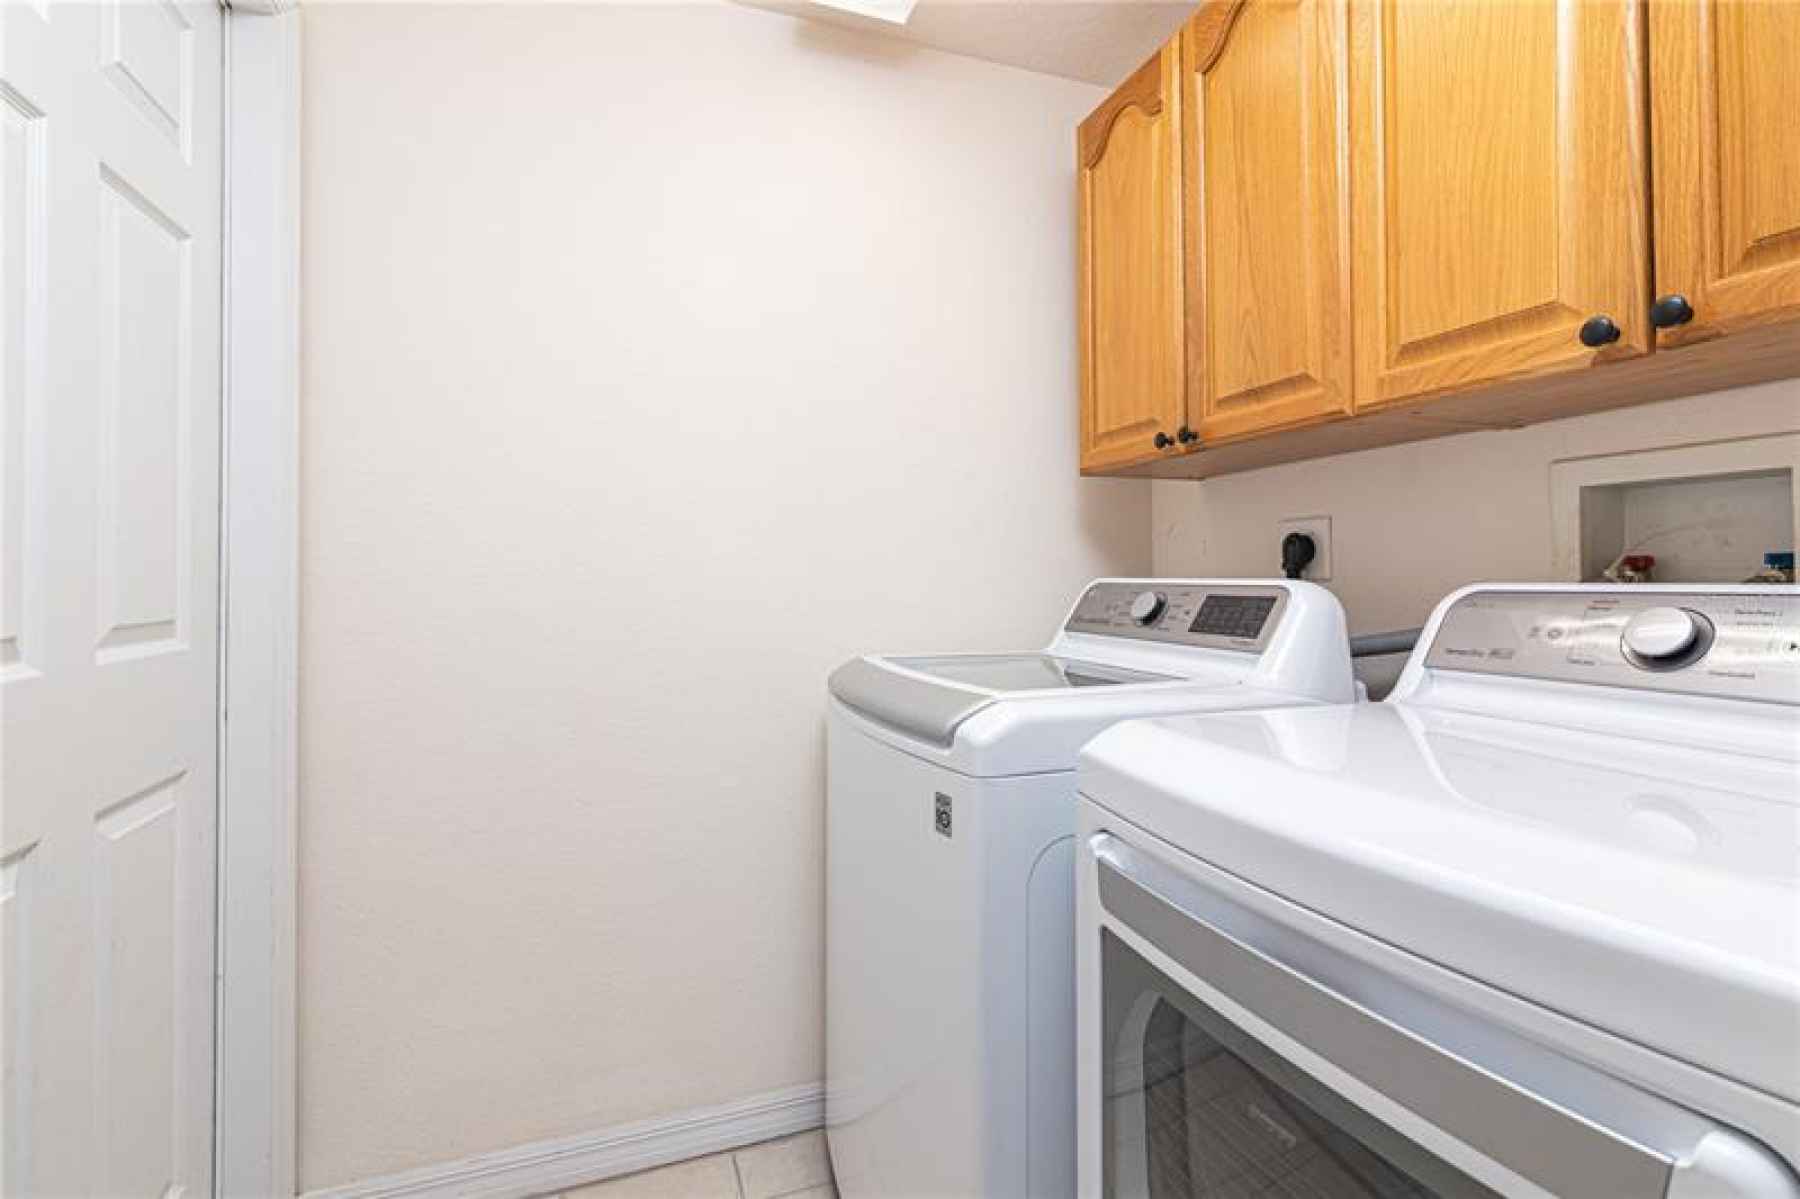 Laundry Room off the Kitchen and the Garage